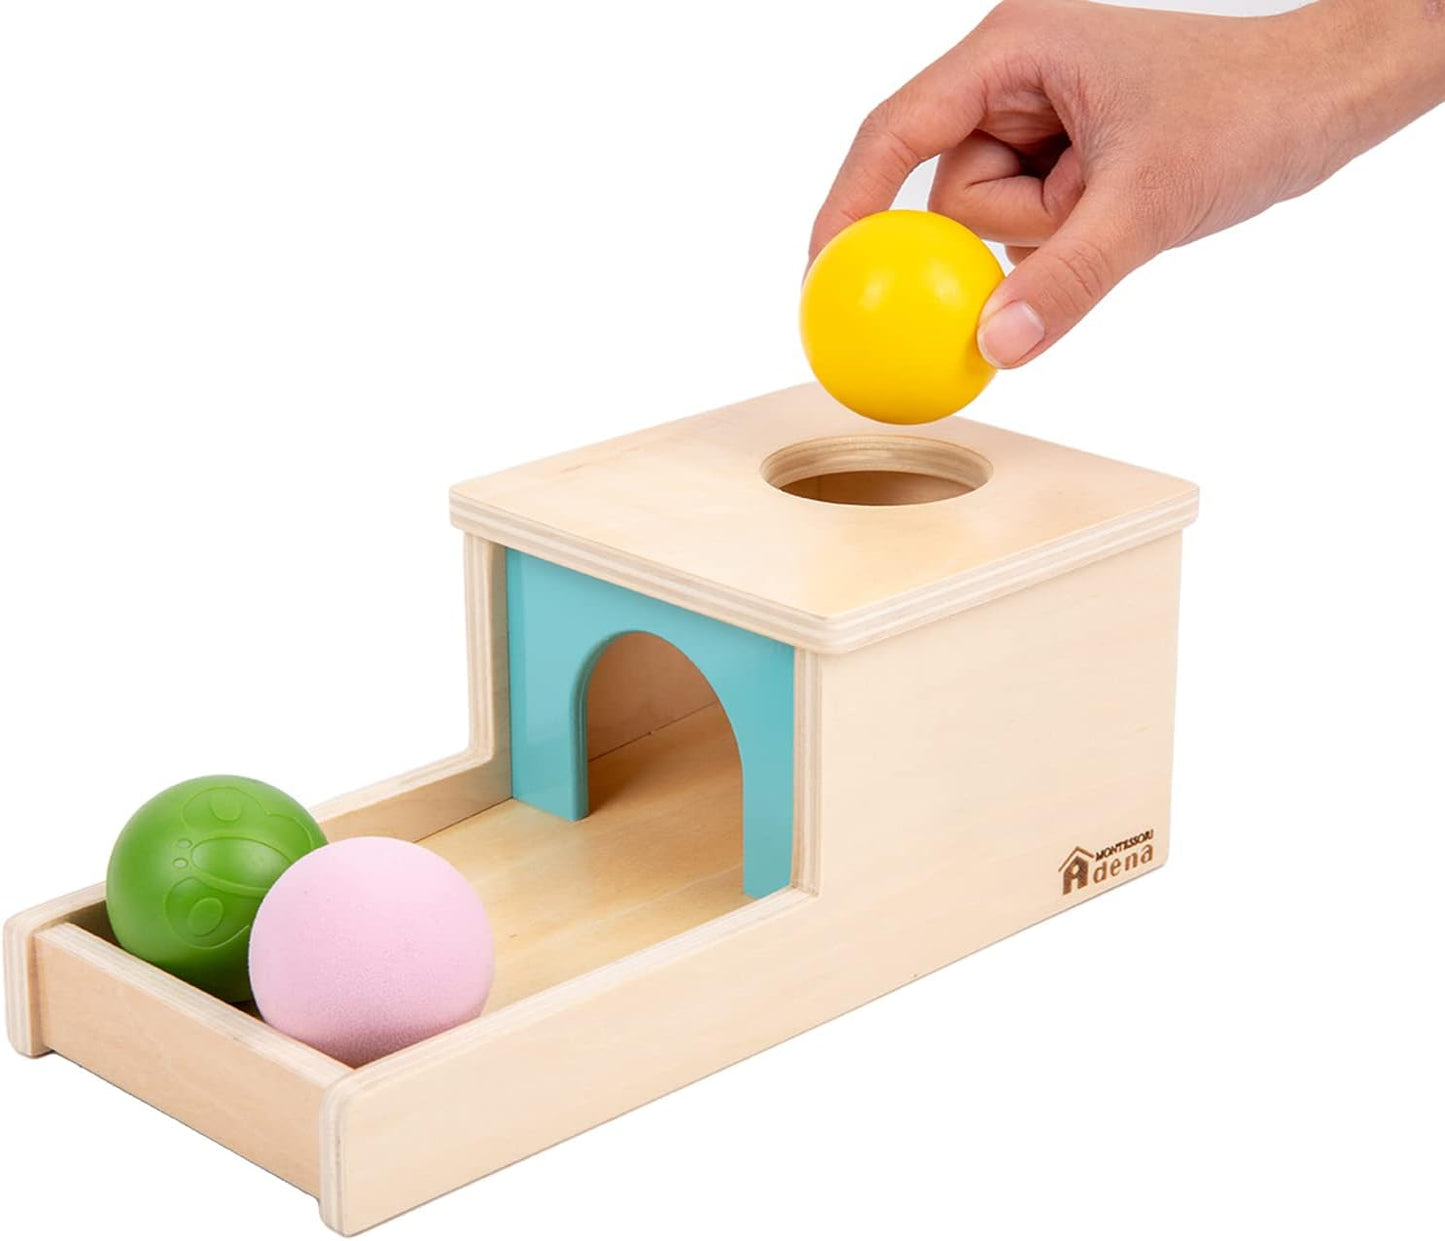 Object Permanence Box with Tray Three Balls Toys for 6-12 Months Baby 1 Year Old Infant Toddler (Small Box - for Boy)